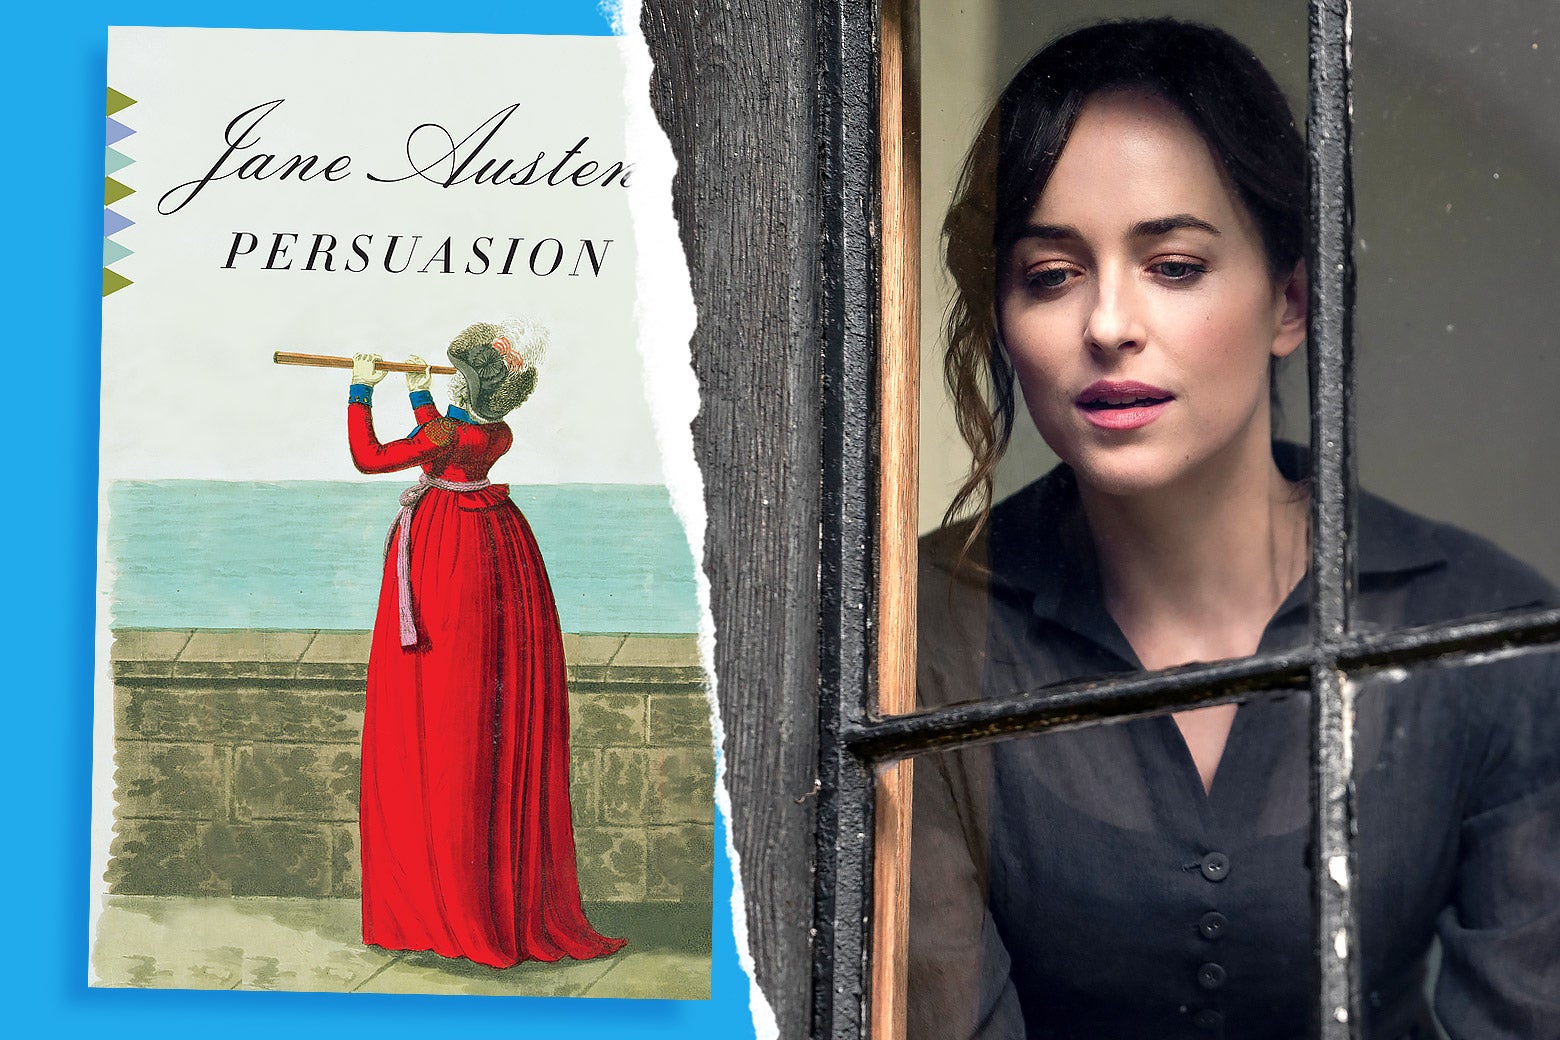 A side-by-side with a tear down the middle. On the left, the book jacket for Jane Austen's persuasion shows a lady raising a telescope to look out to the sea. On the right, Dakota Johnson looks eagerly out a window.